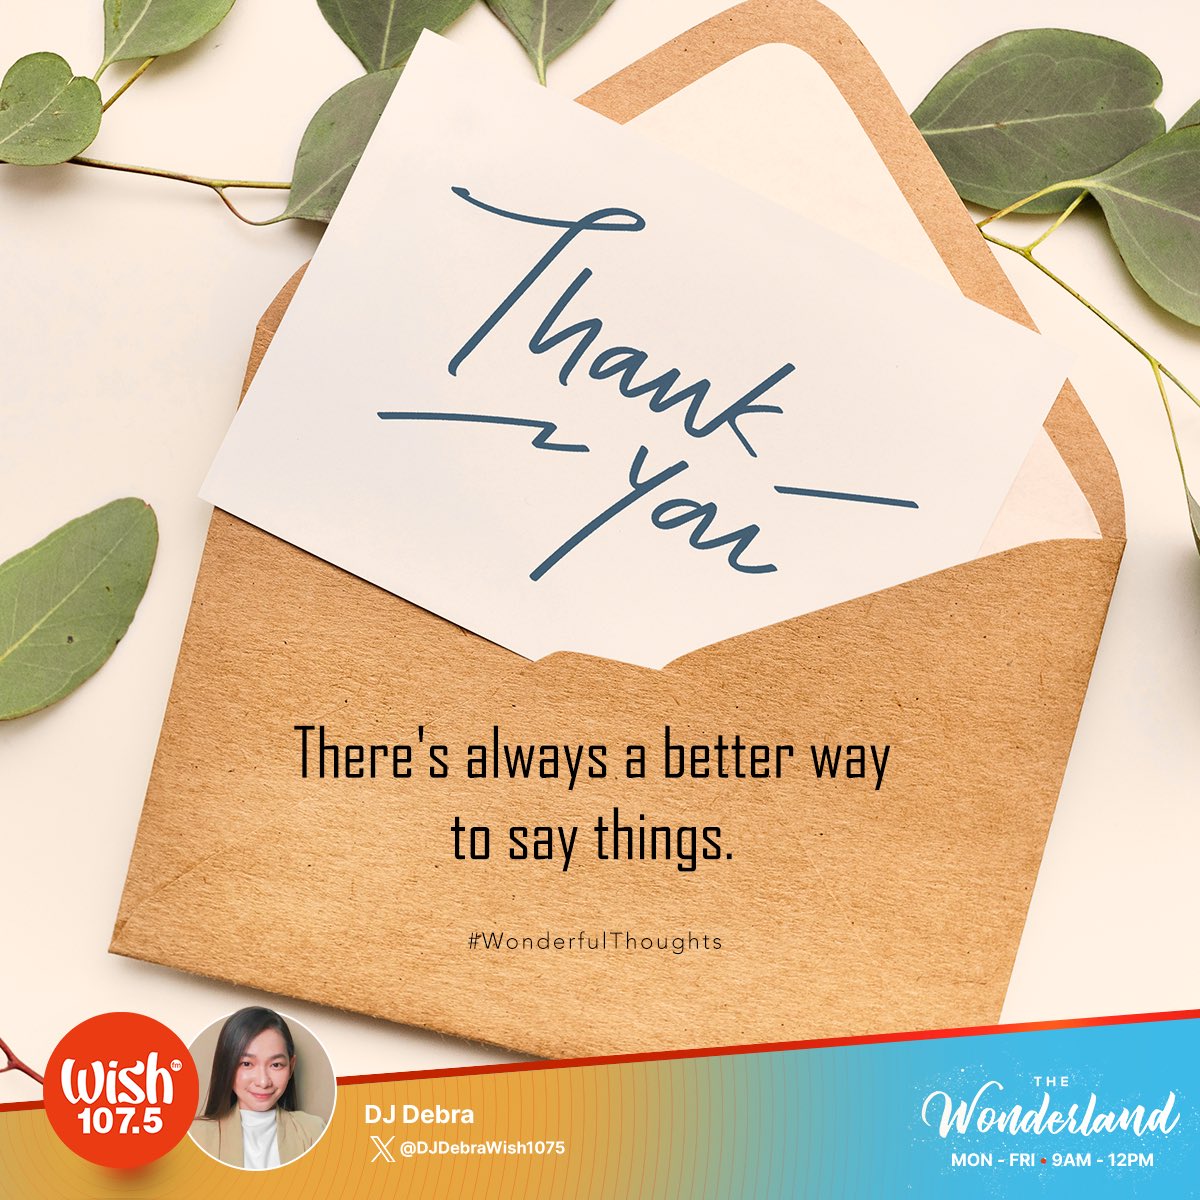 #WonderfulThoughts: There's always a better way to say things. Tune in to the Wonderland and enjoy the perfect mix of classic and contemporary hits from 9 a.m. until noon! Live streaming is also available via wish1075.com.